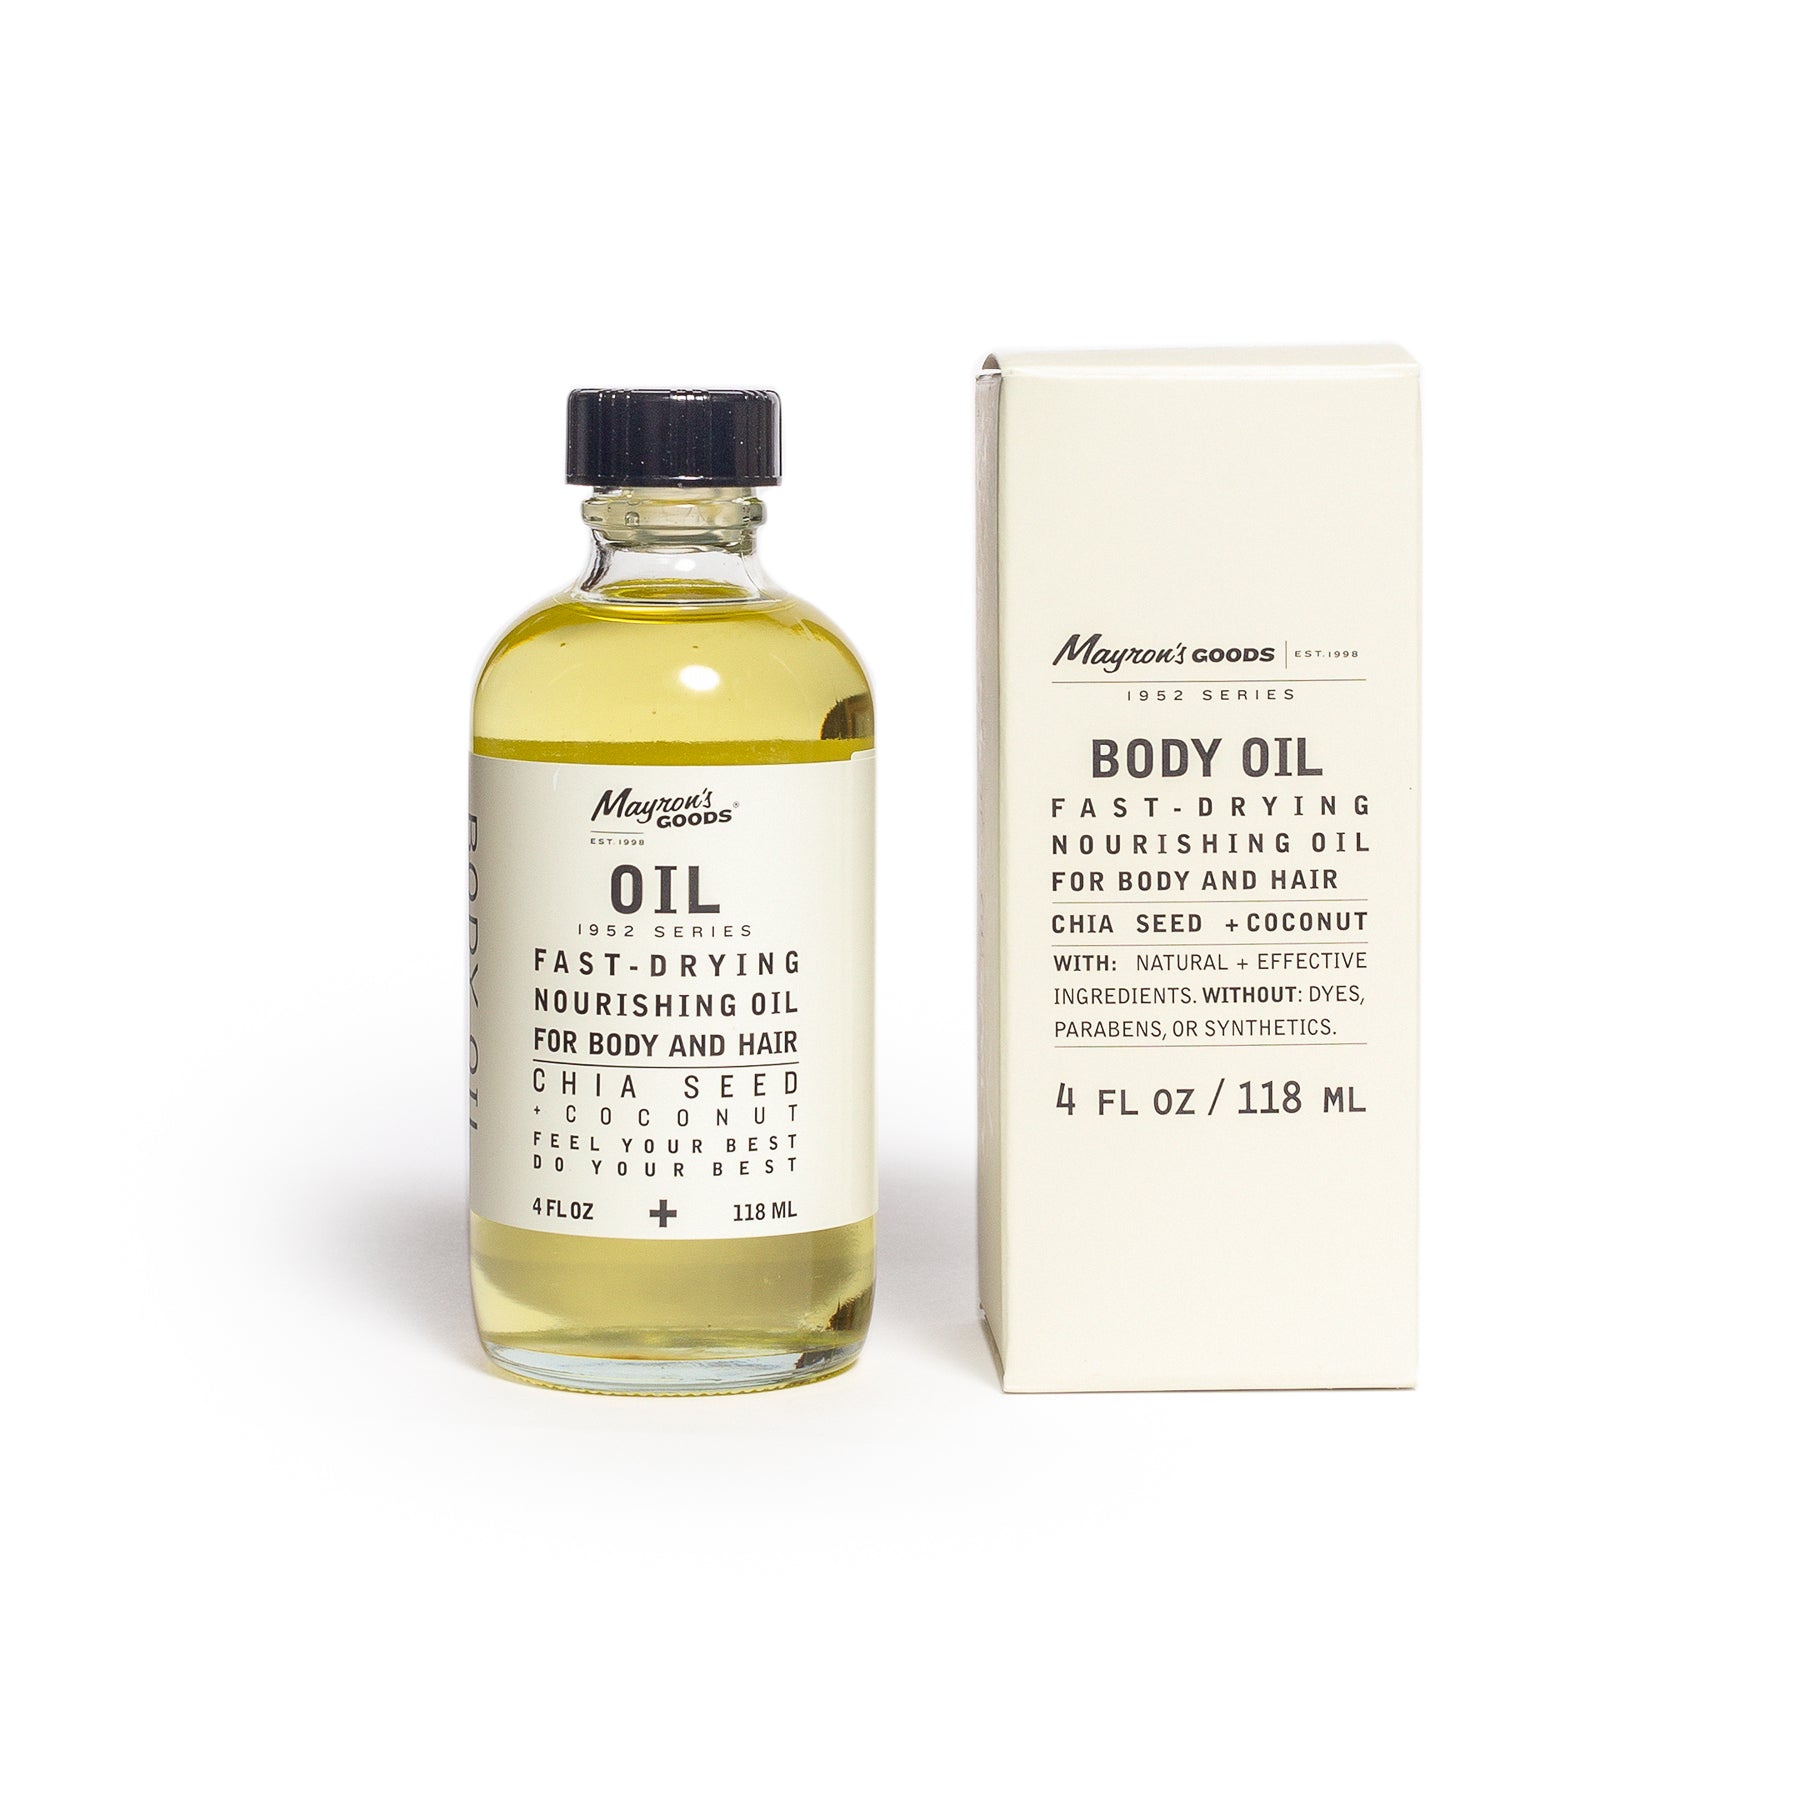 Mayron's Goods Body and Hair Oil